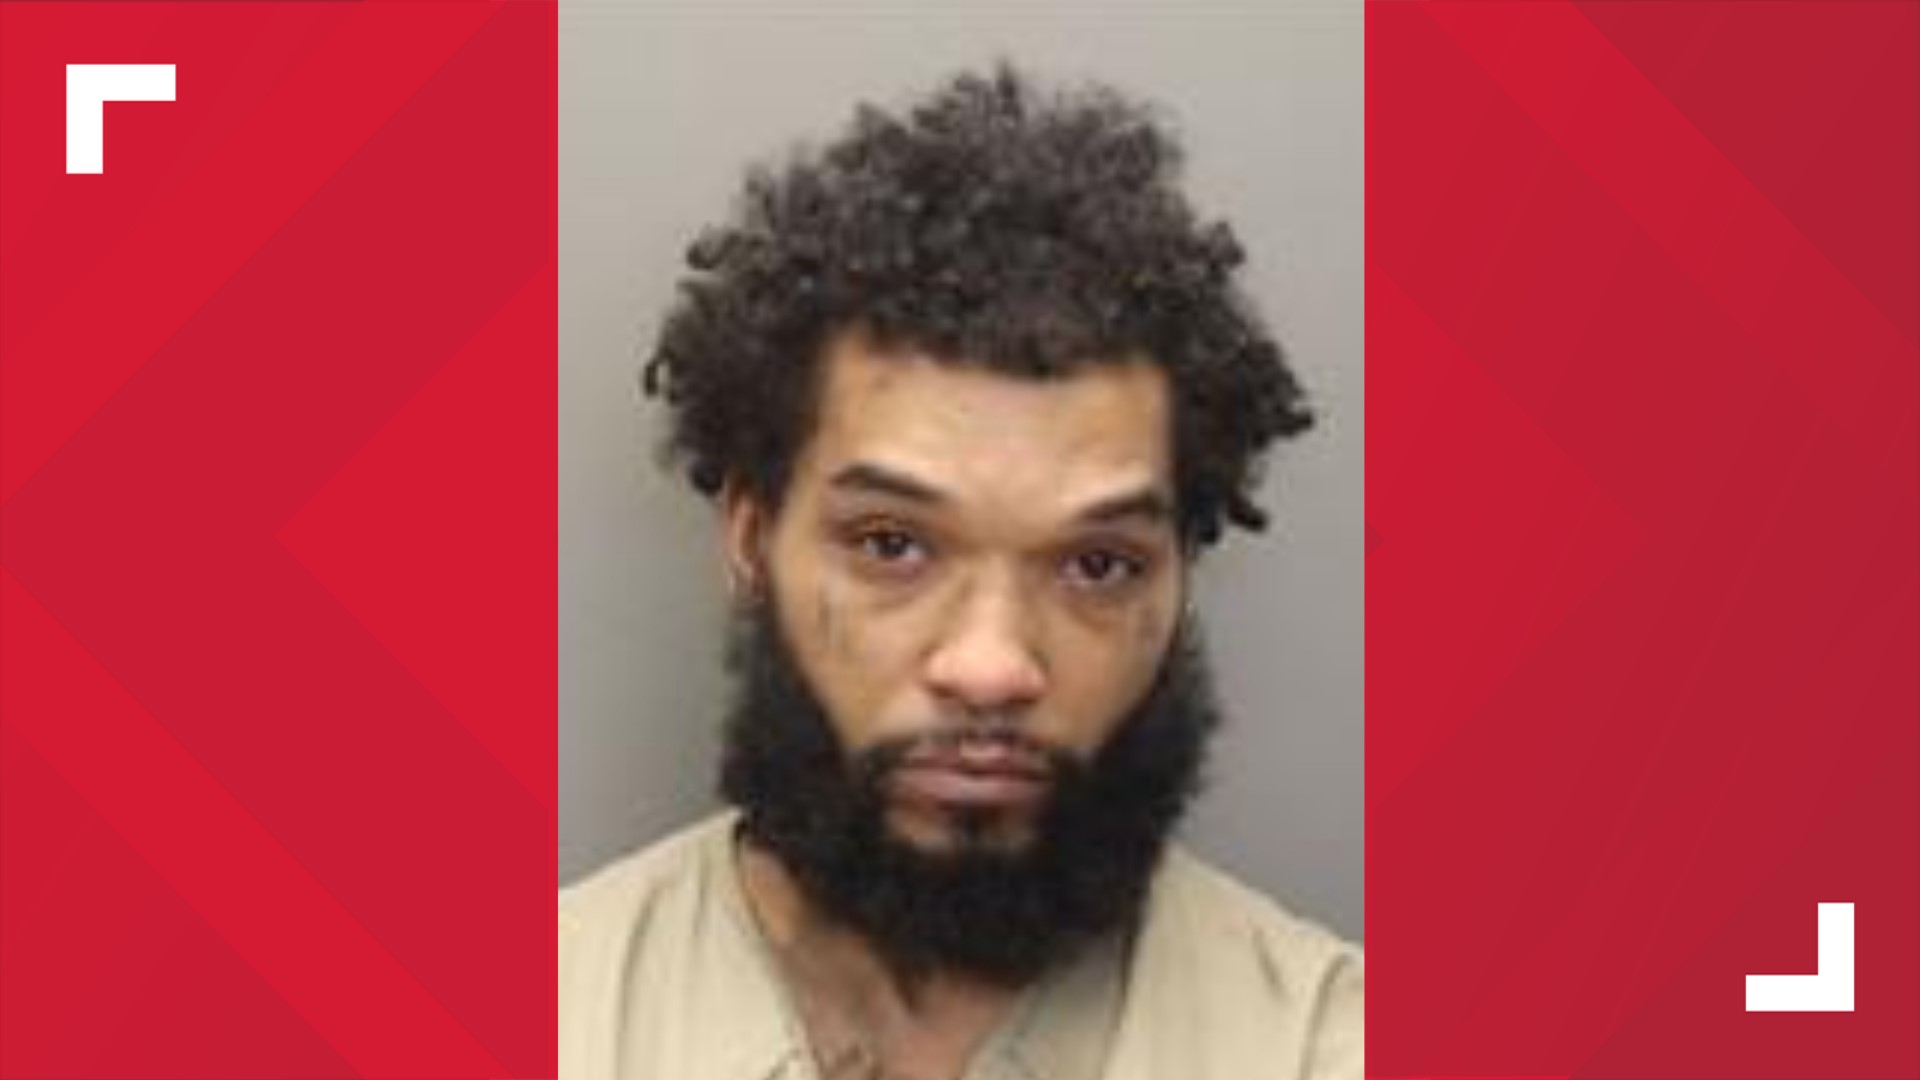 Isaac Clark, 34, was taken into custody Sunday on a murder warrant that was filed for his arrest, according to the Columbus Division of Police.